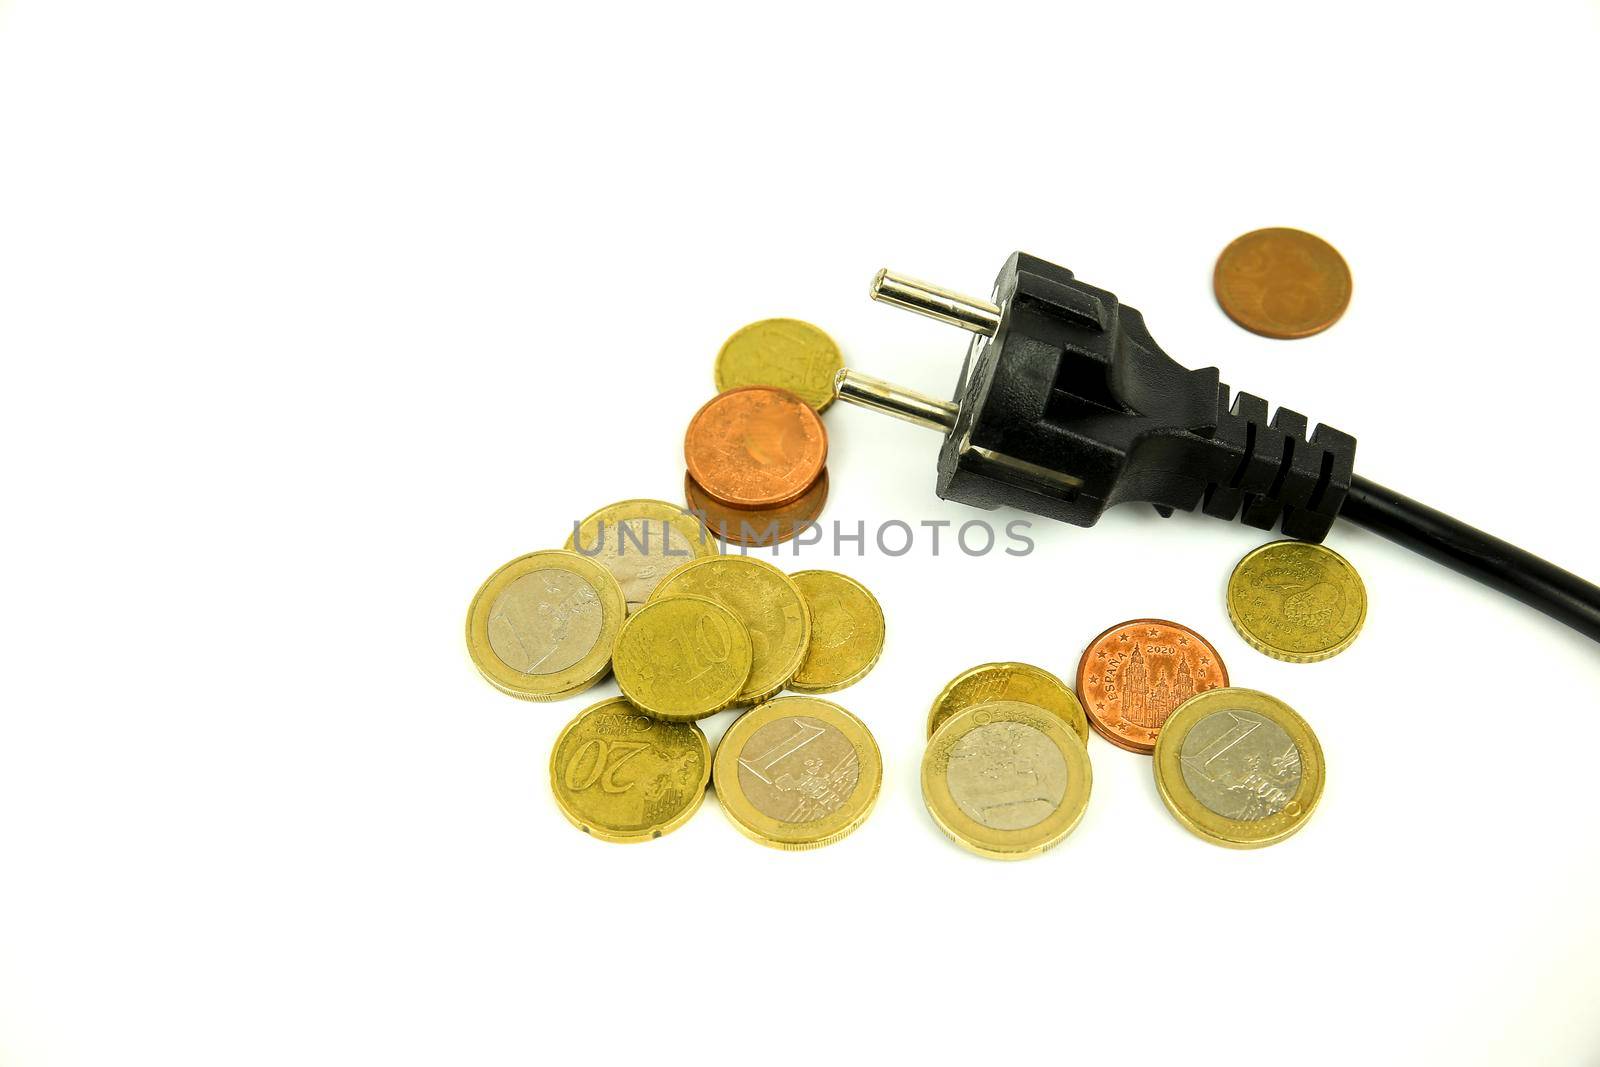 Pin power plug and coins on white background by soniabonet